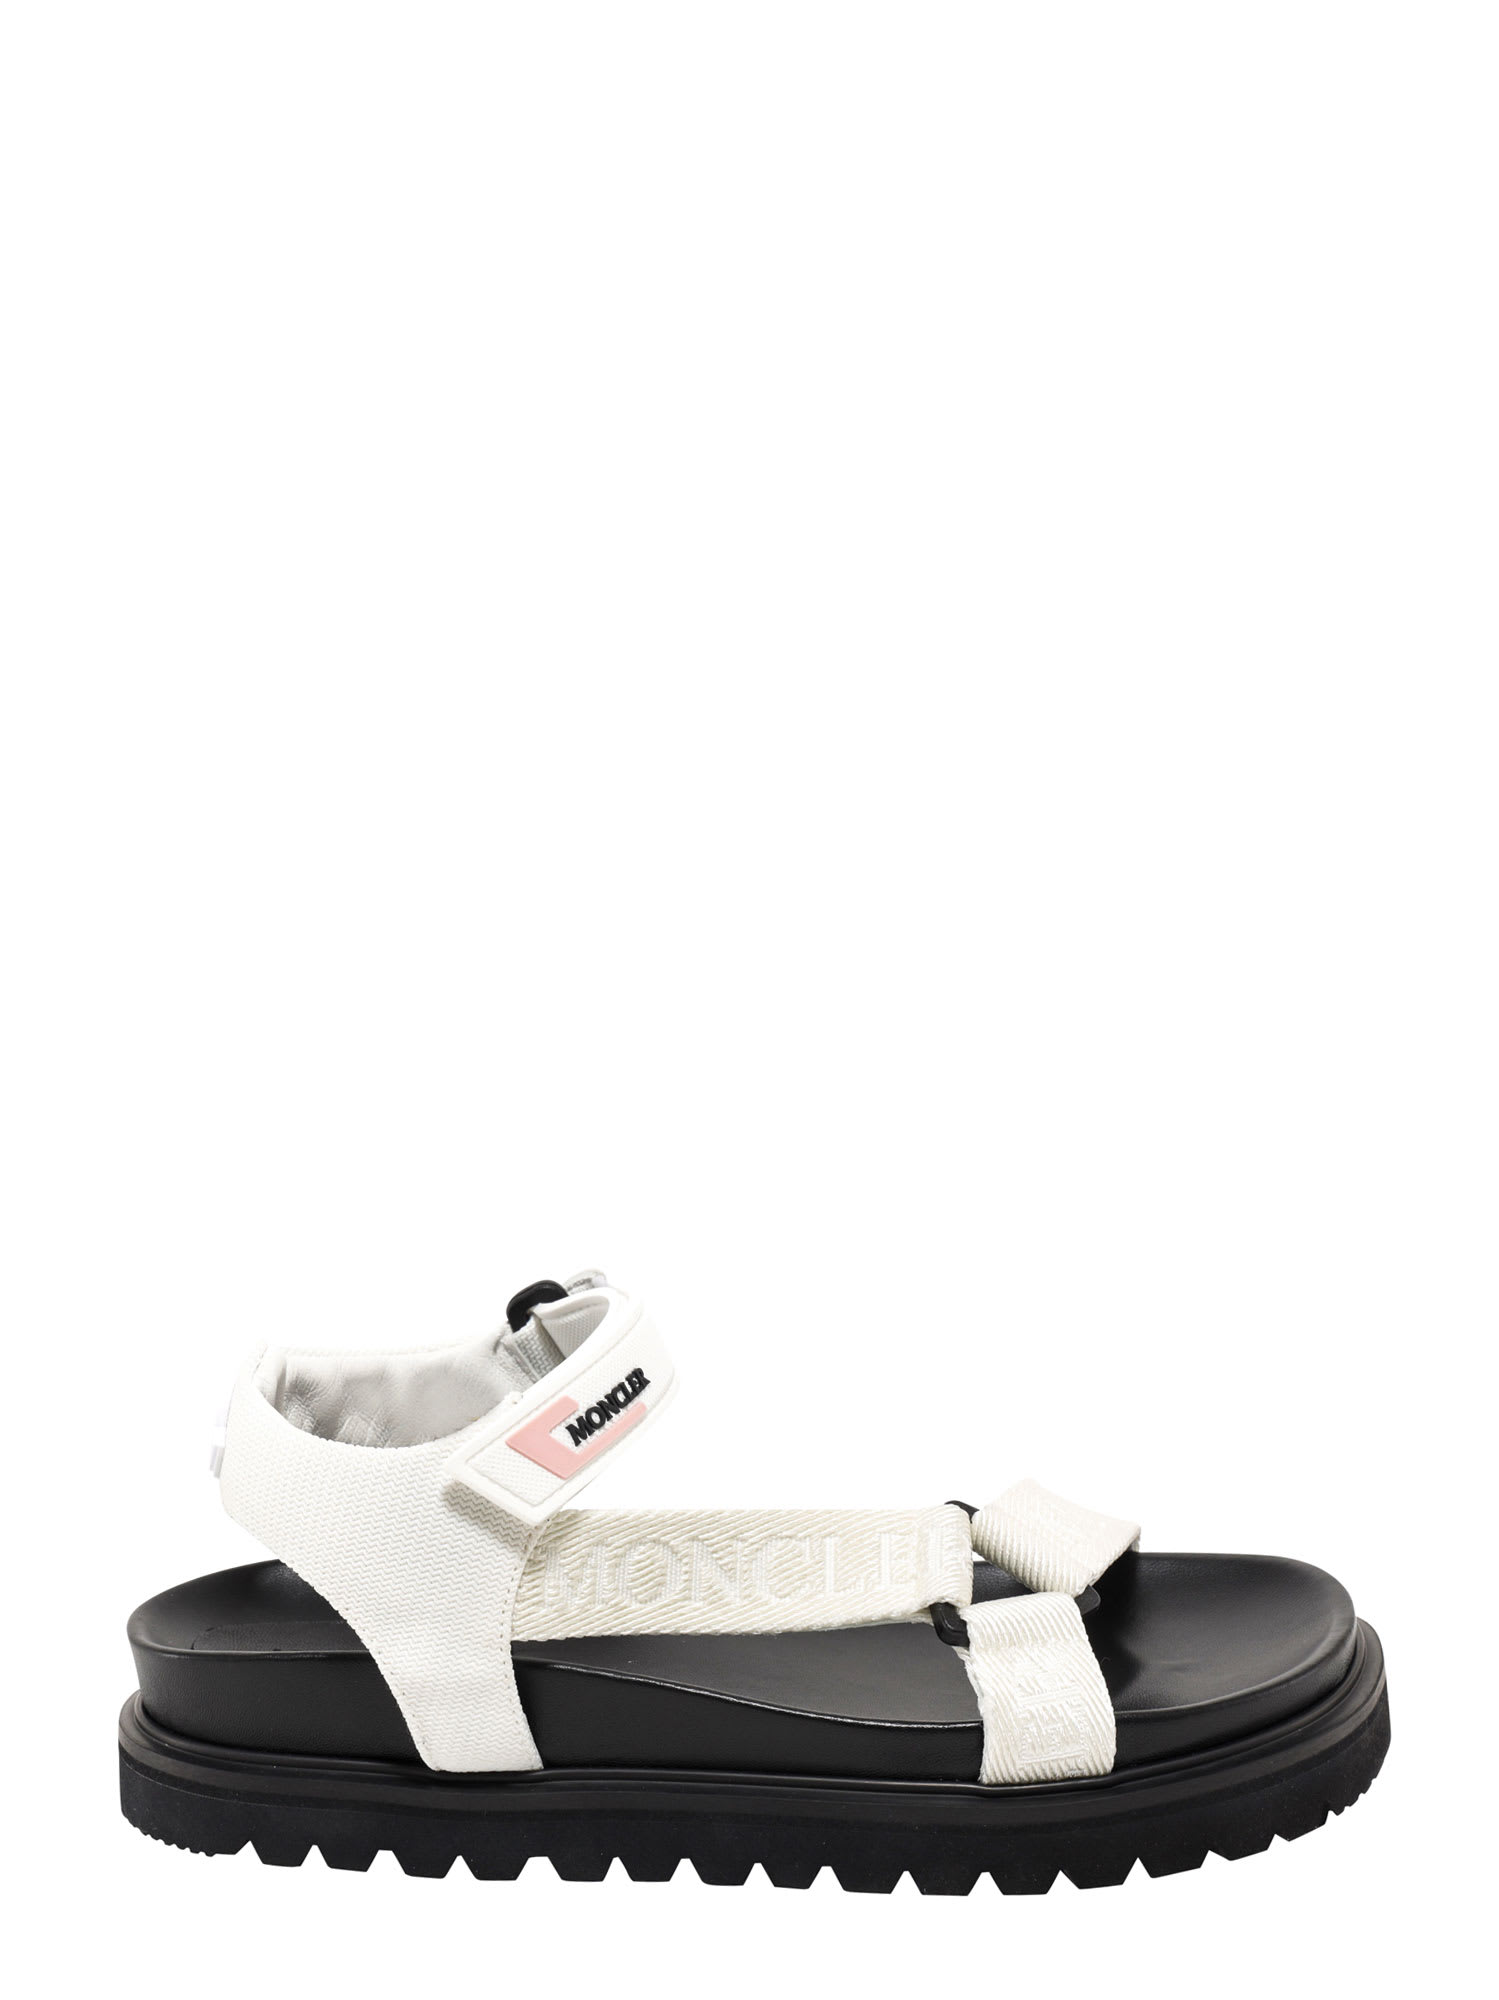 Buy Moncler Sandals online, shop Moncler shoes with free shipping